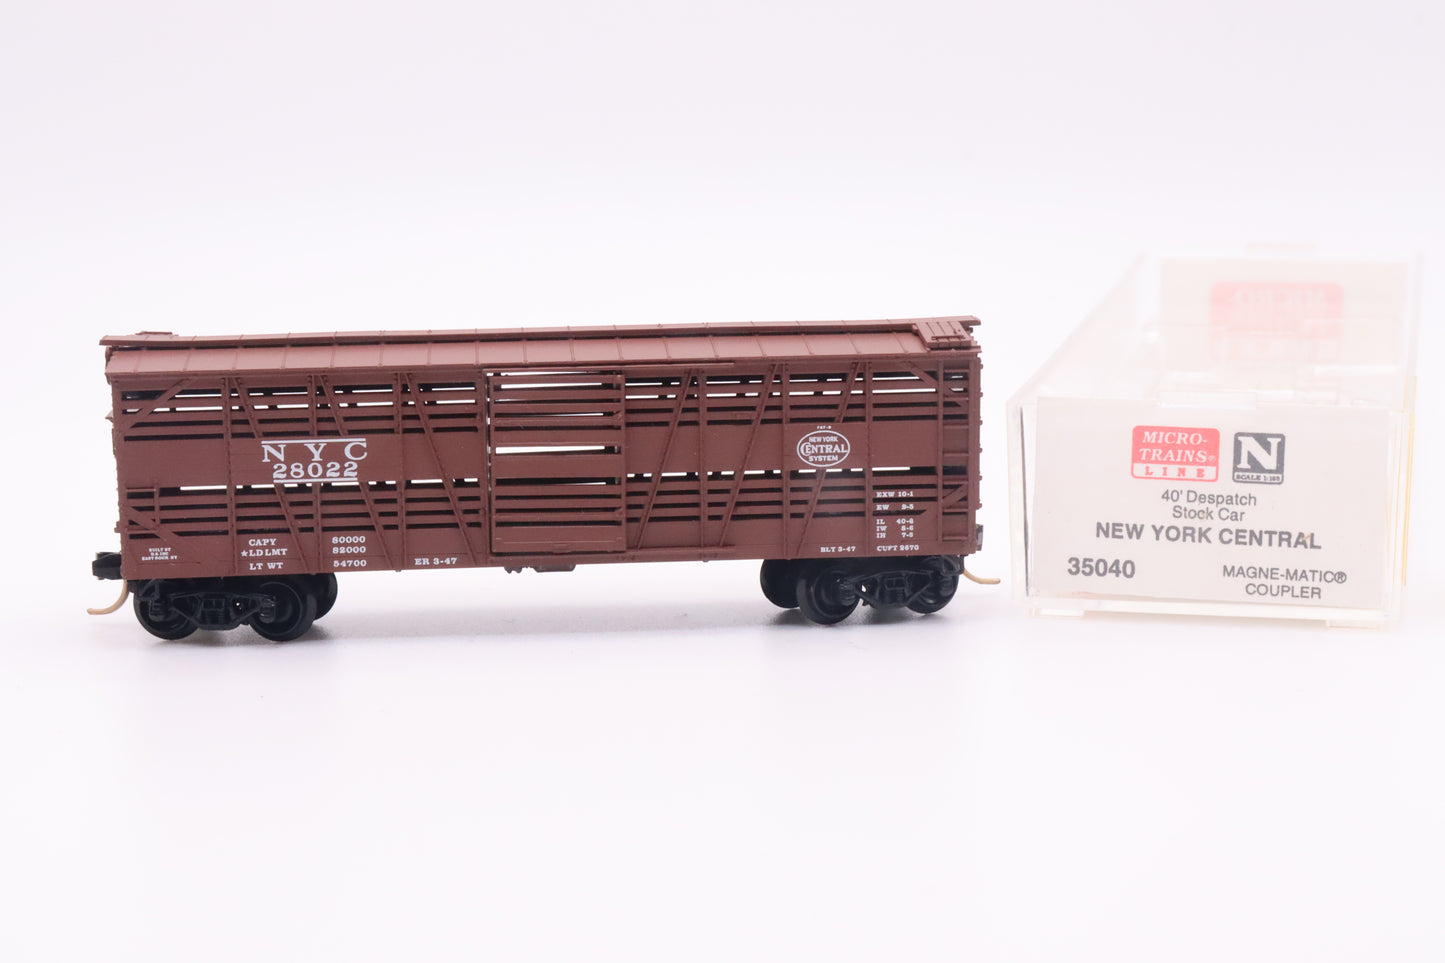 MTL-35040 - 40' Despatch Stock Car - New York Central - NYC-28022